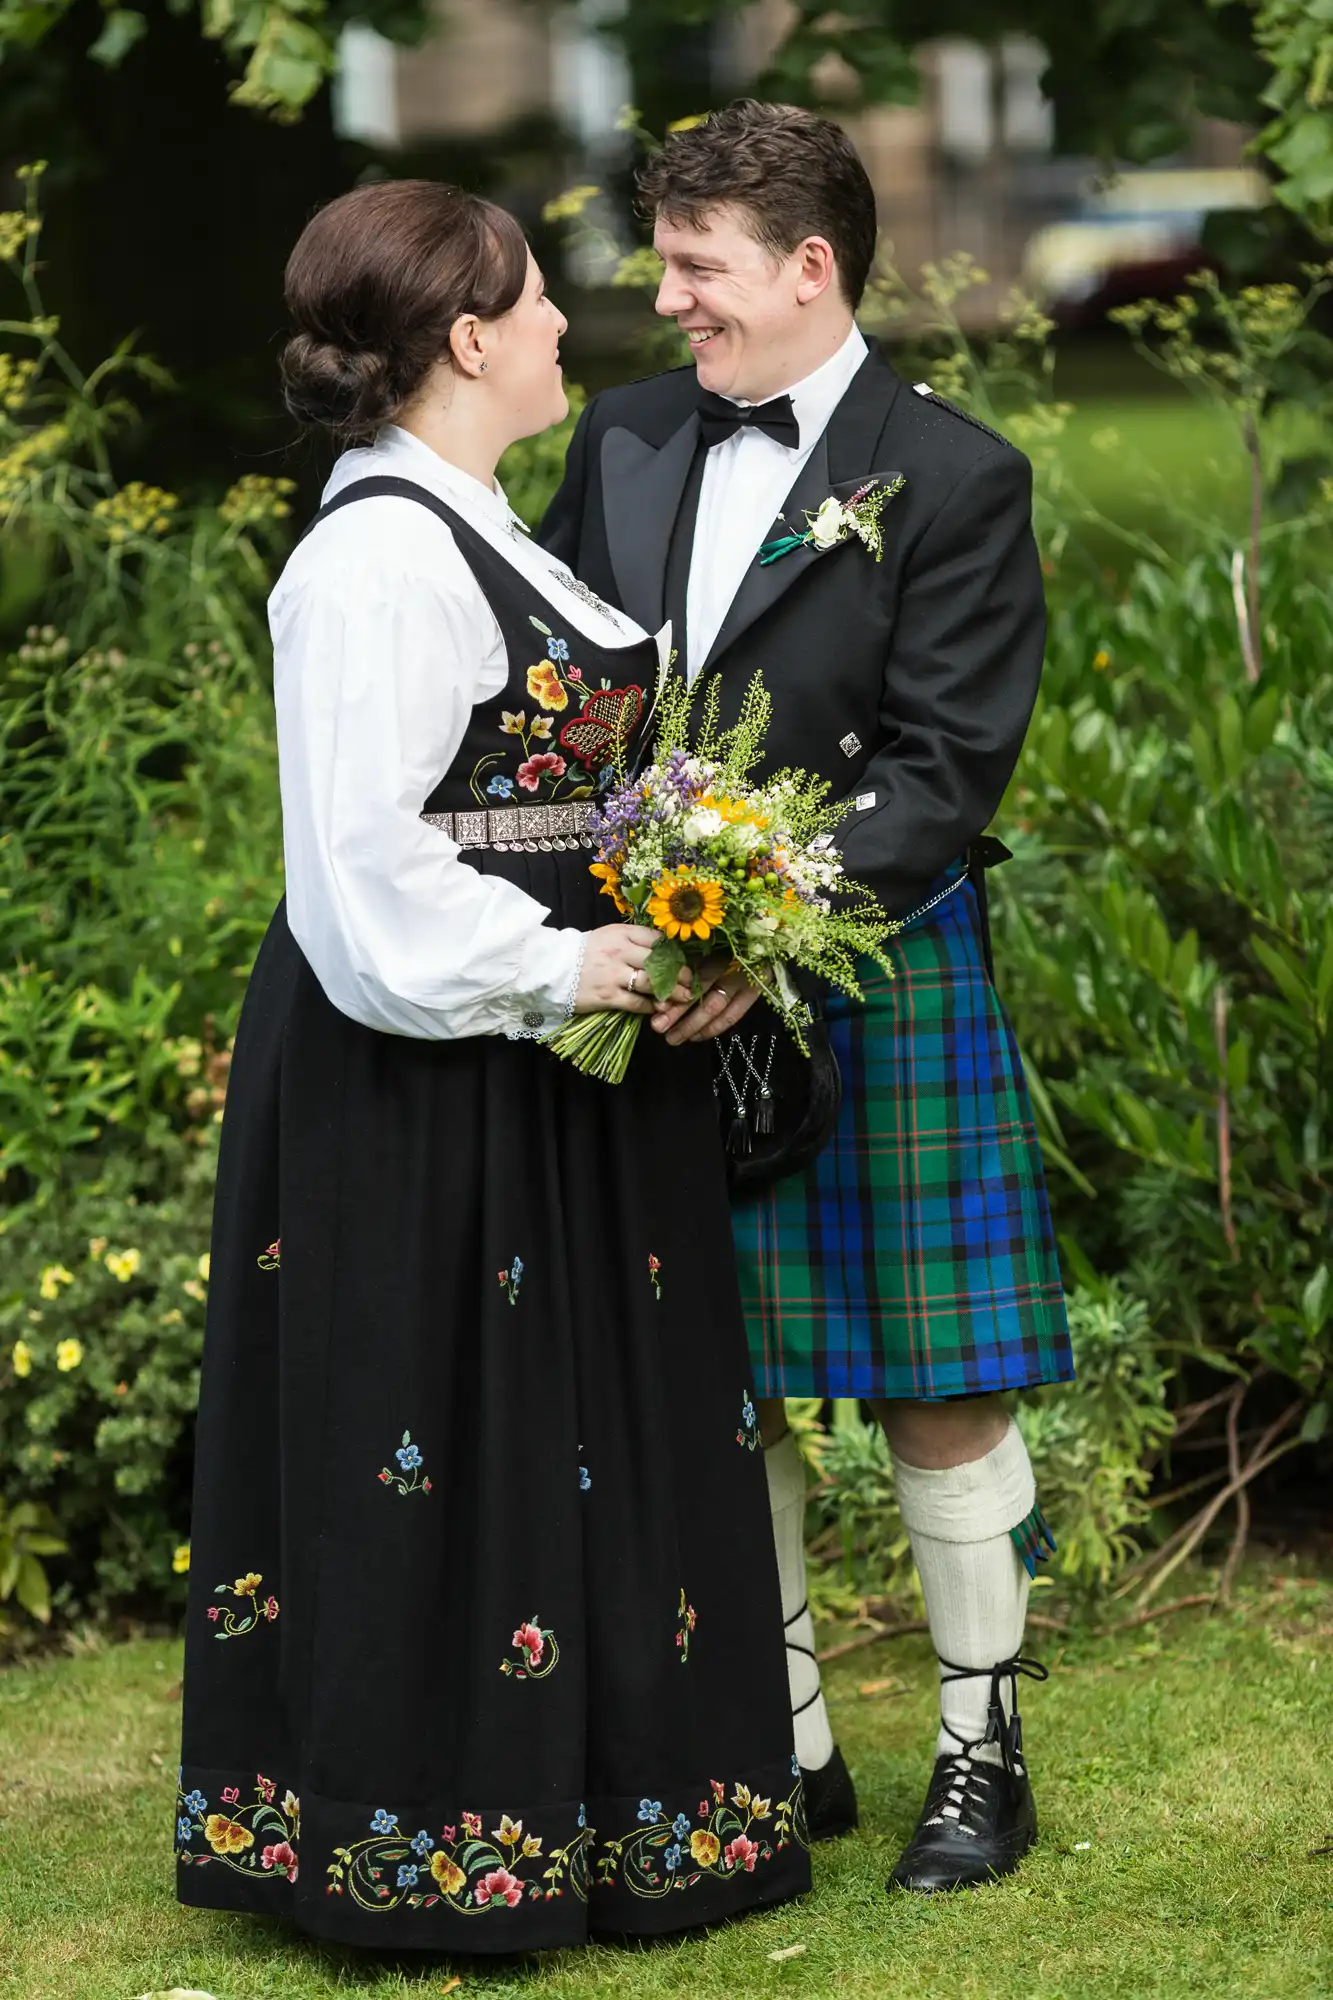 A bride in a traditional norwegian dress and a groom in a scottish kilt, smiling at each other and holding a bouquet, standing in a garden.